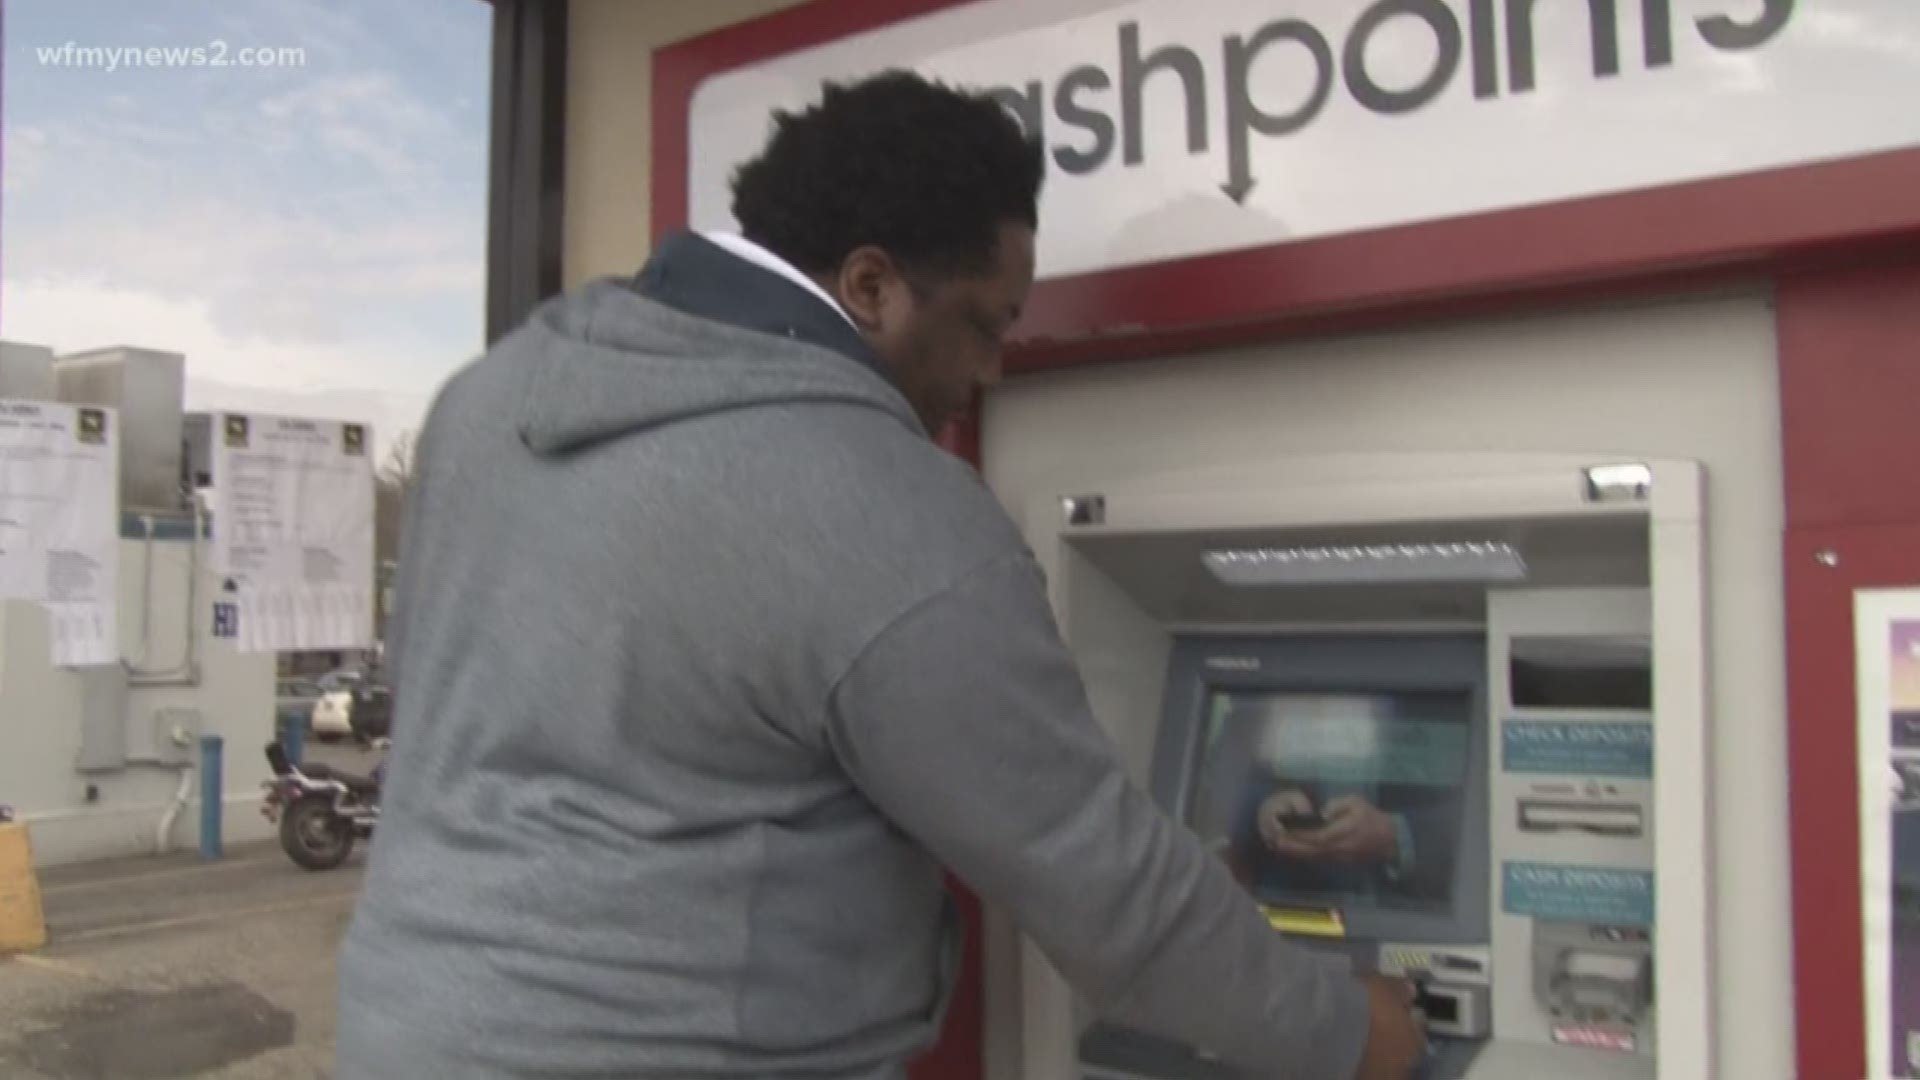 James Joyner was just trying was get money out of the ATM to pay his barber.
But on this trip to the ATM -- he took out a lot more than money.